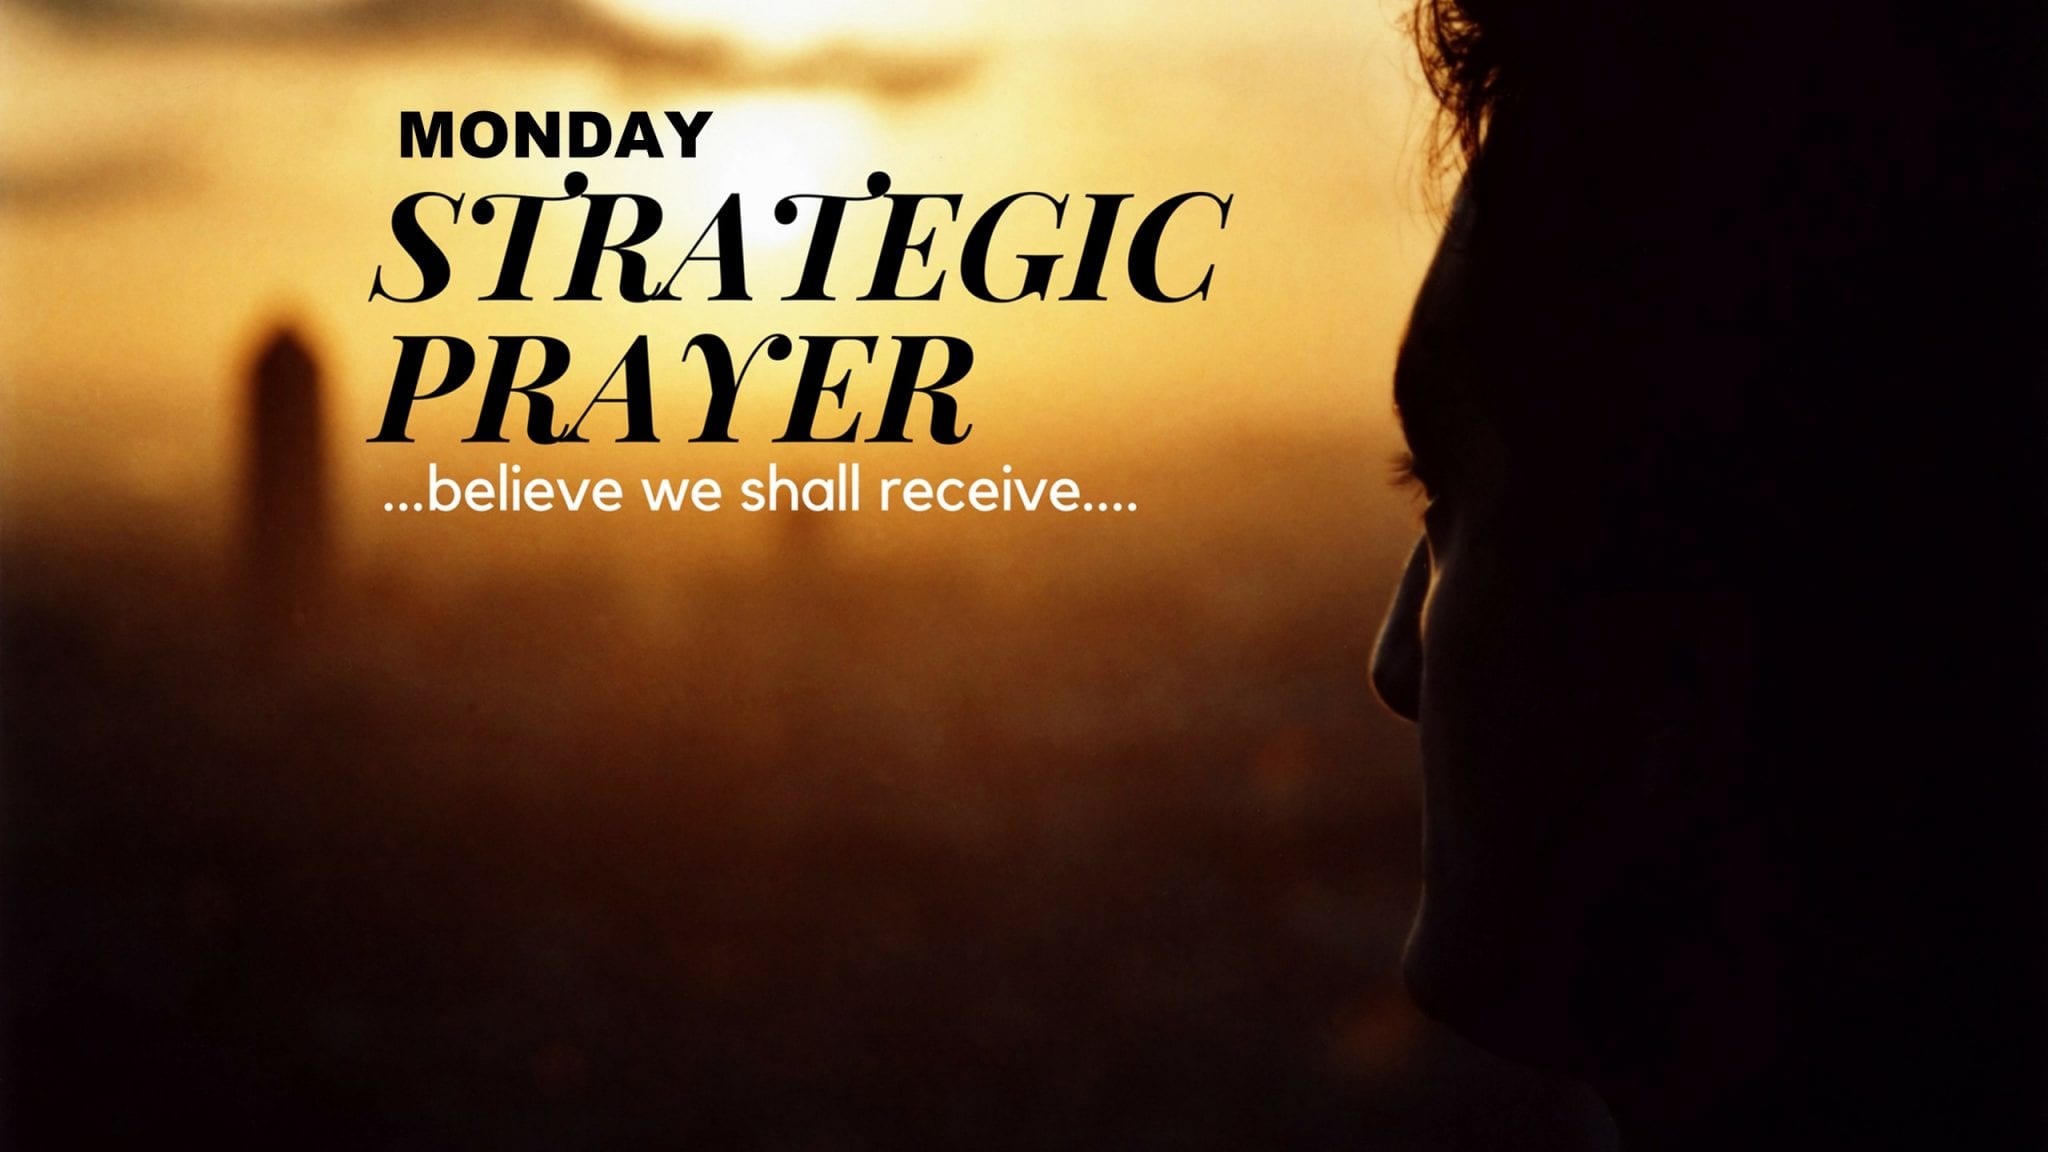 Perfect Monday Prayer Quotes and Bible Verse for every Monday Morning